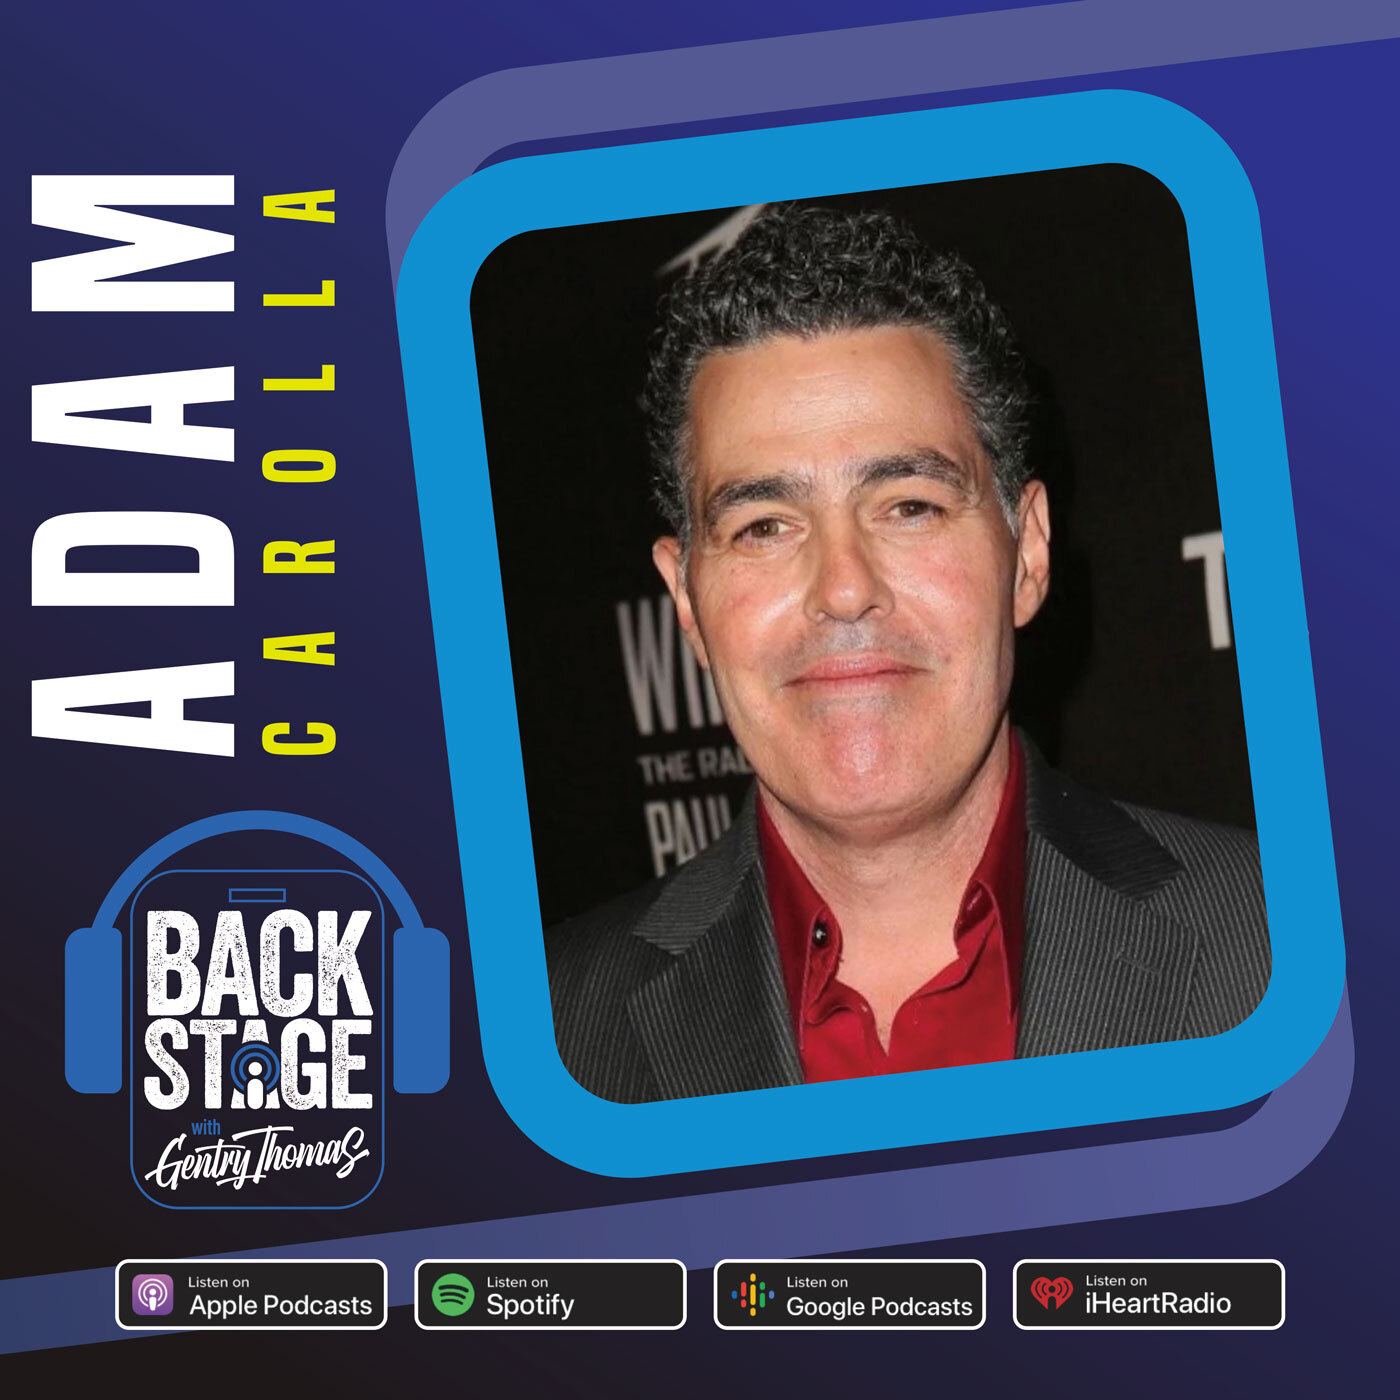 Adam Carolla Joins Gentry Thomas Has No Apologies For His New Book